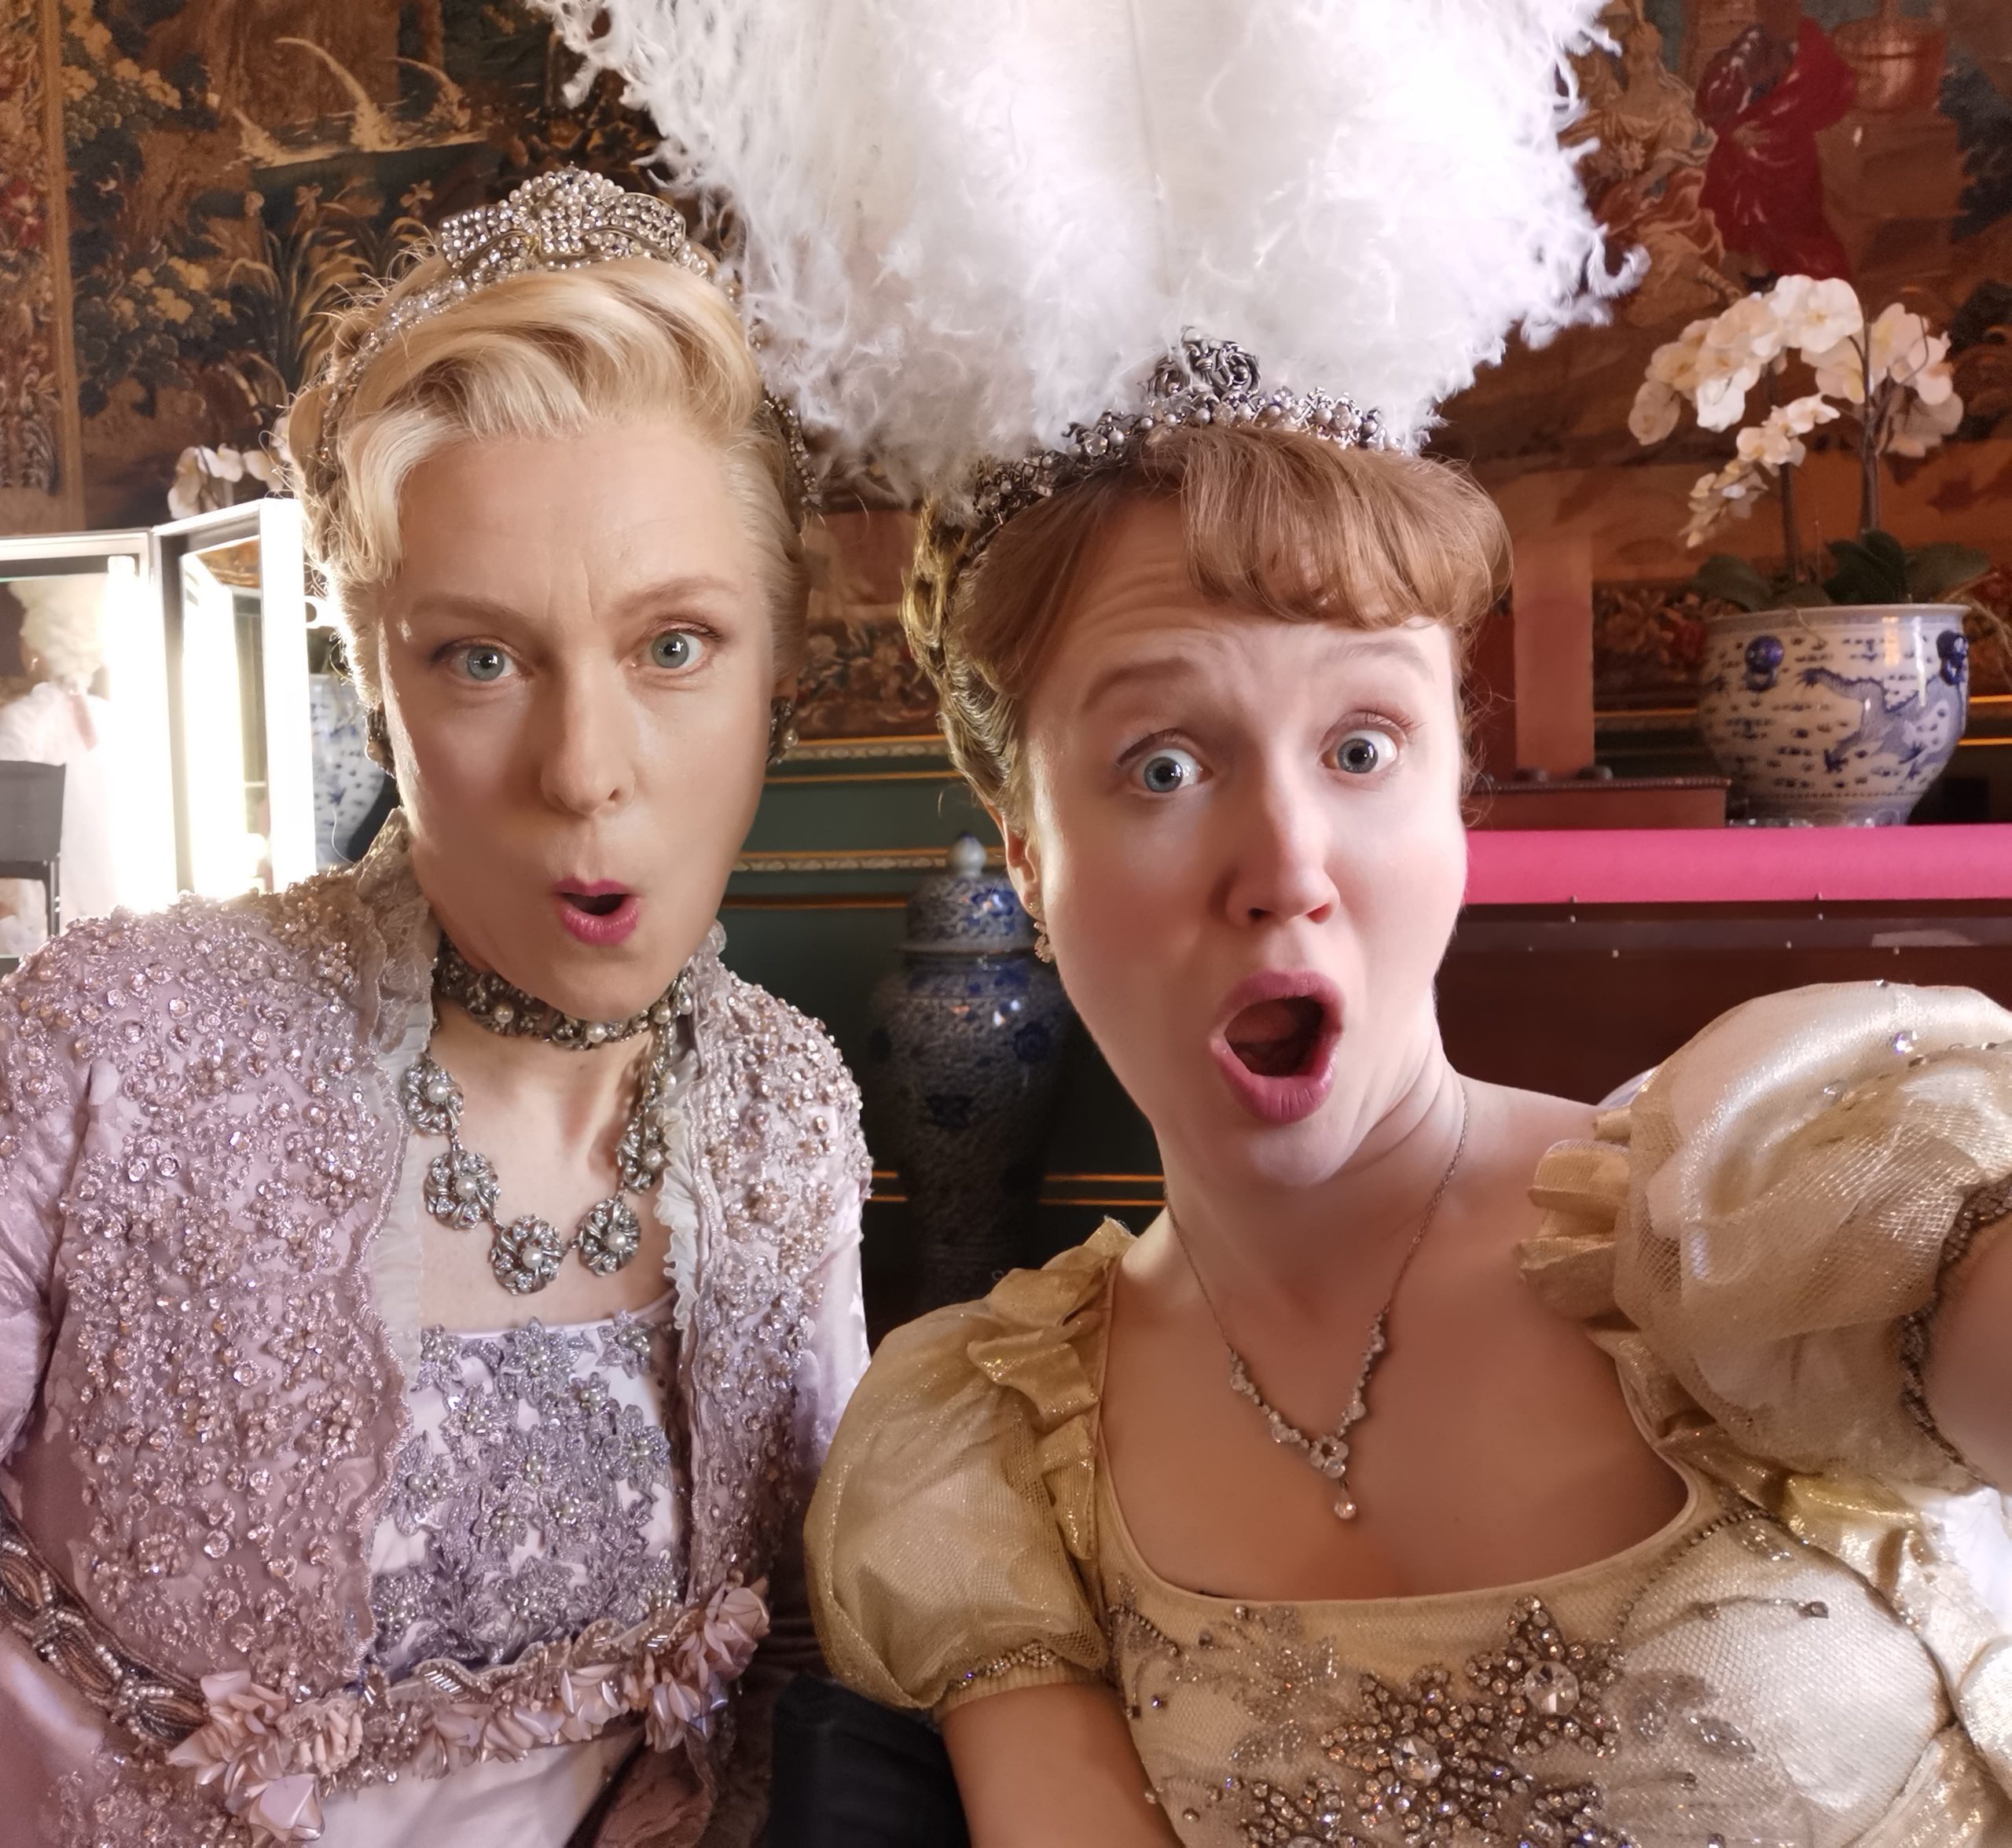 Sophie Woolley and Kitty Devlin pull comedy faces and are wearing Regency Costumes for Bridgerton season 3